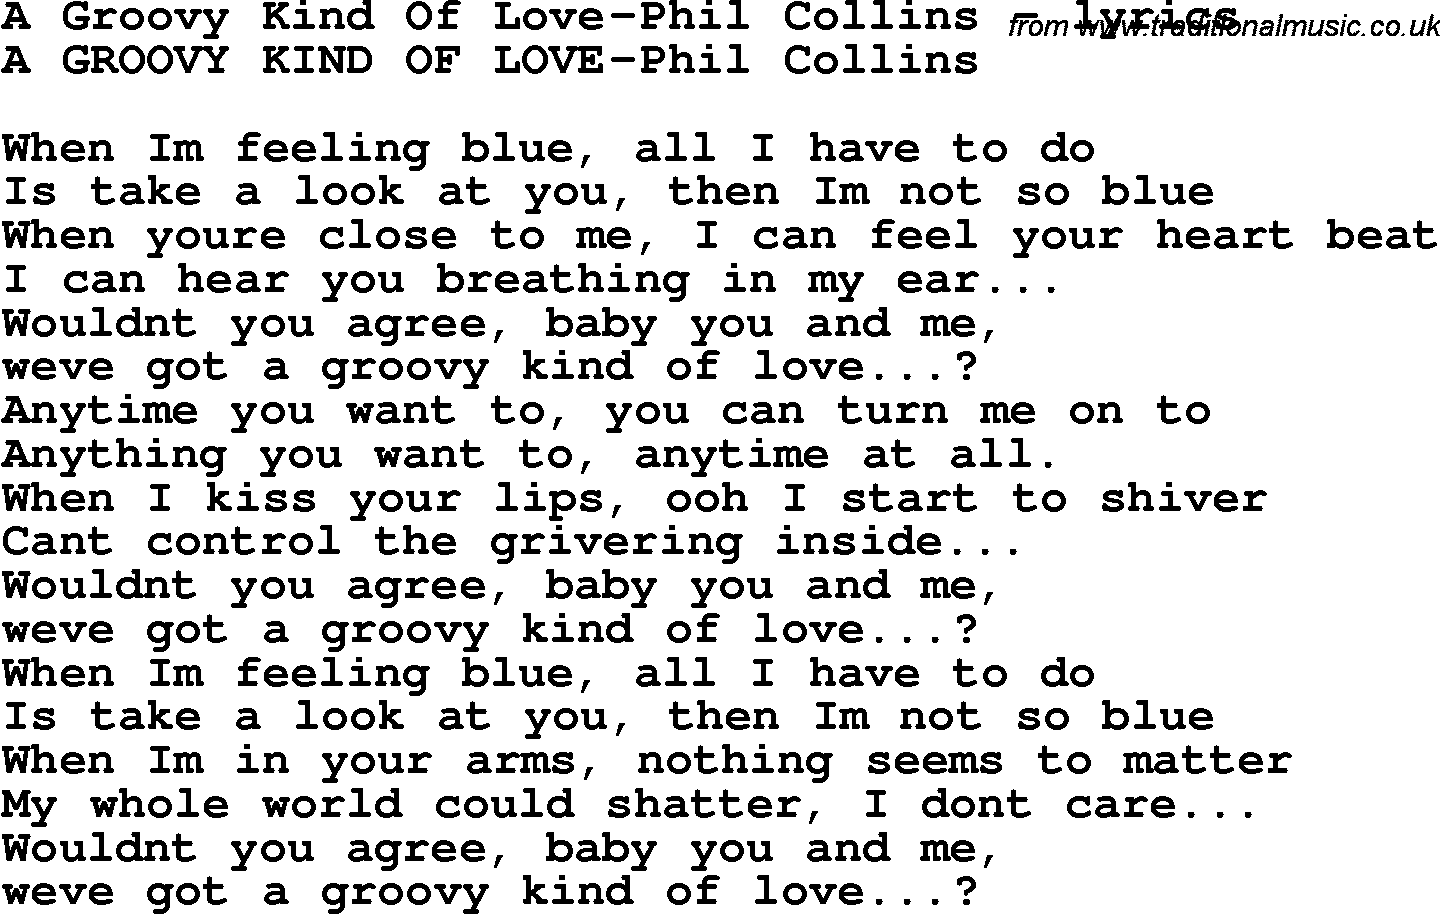 A Groovy Kind of Love - song and lyrics by Phil Collins